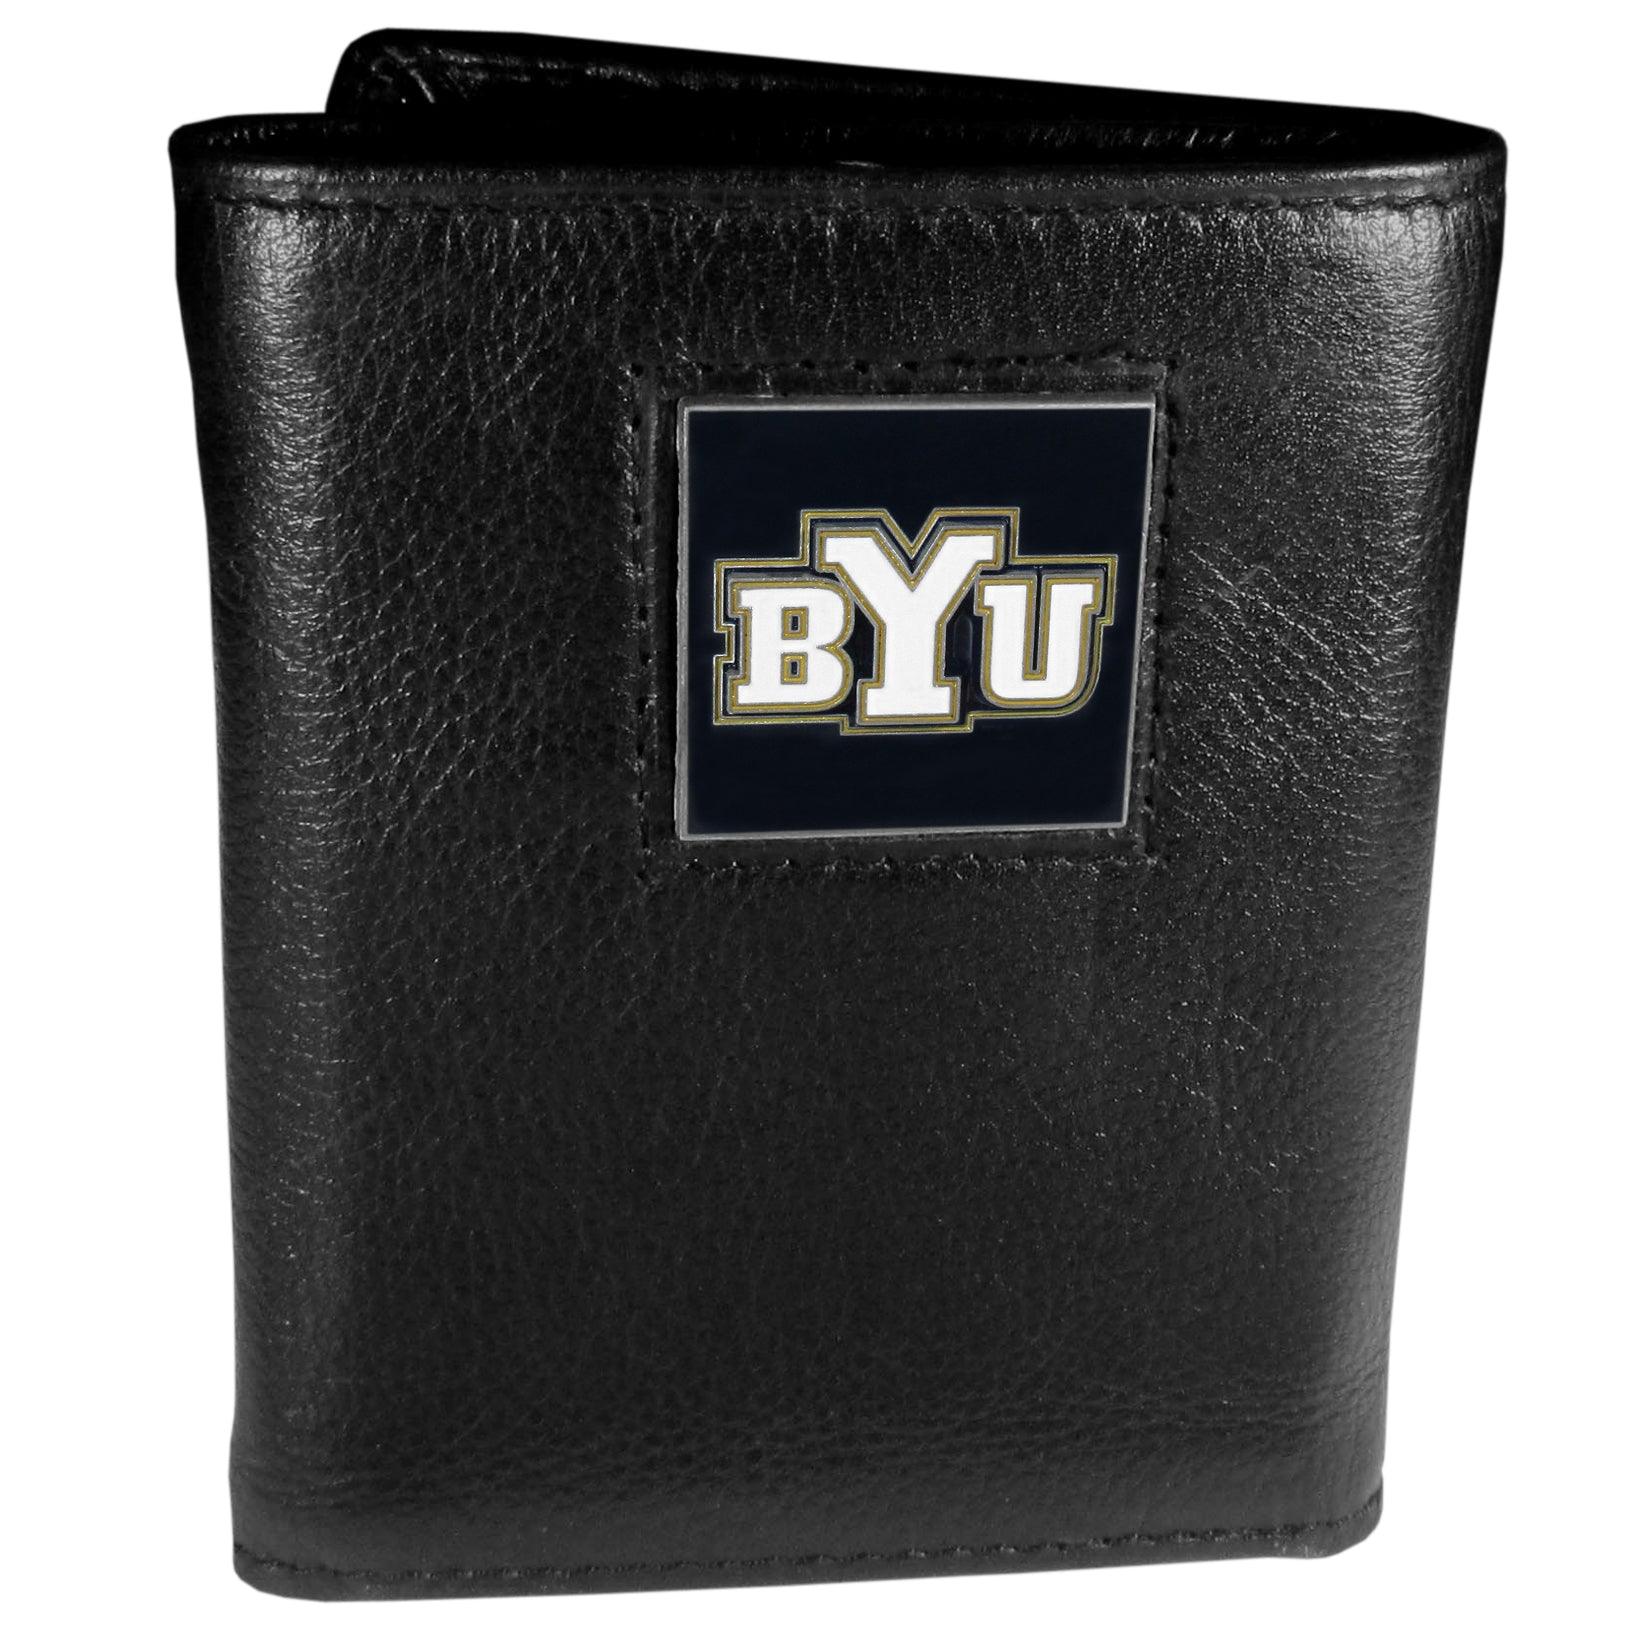 BYU Cougars Deluxe Leather Tri-fold Wallet Packaged in Gift Box - Flyclothing LLC